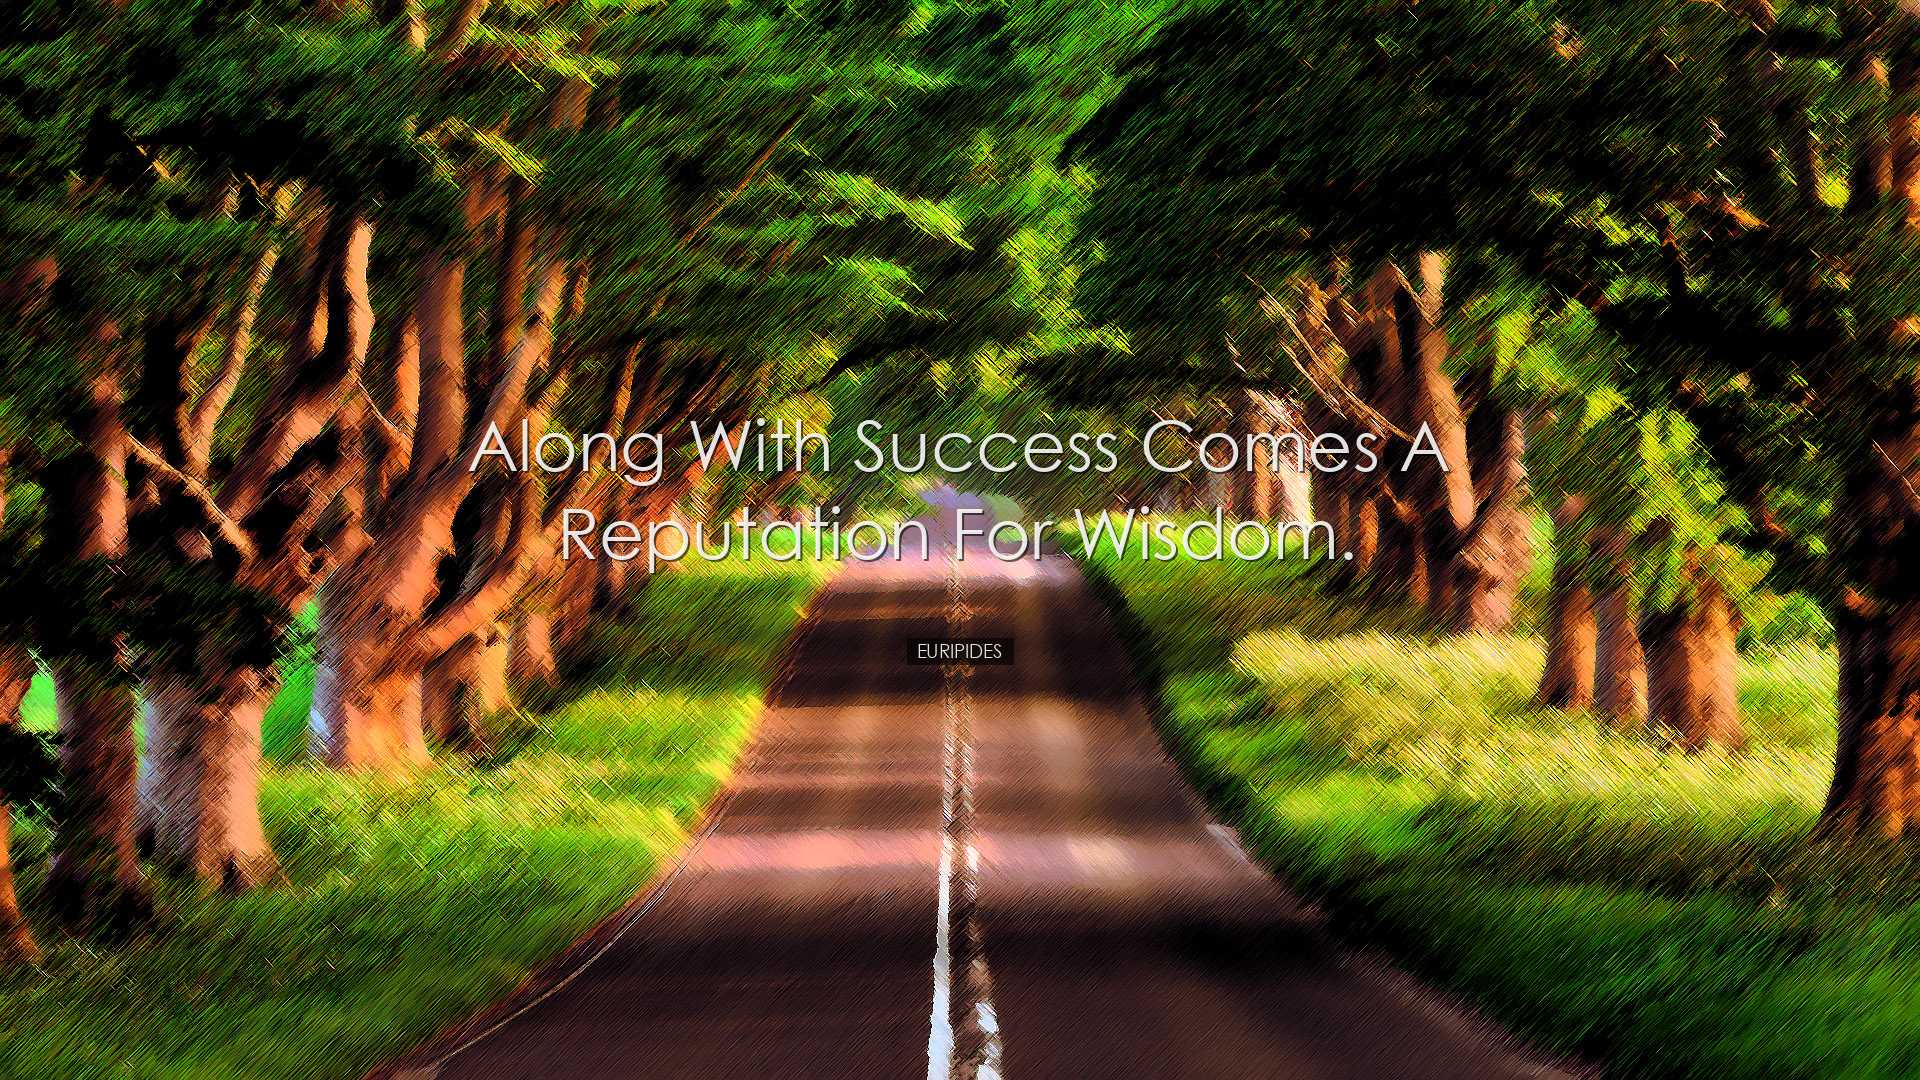 Along with success comes a reputation for wisdom. - Euripides